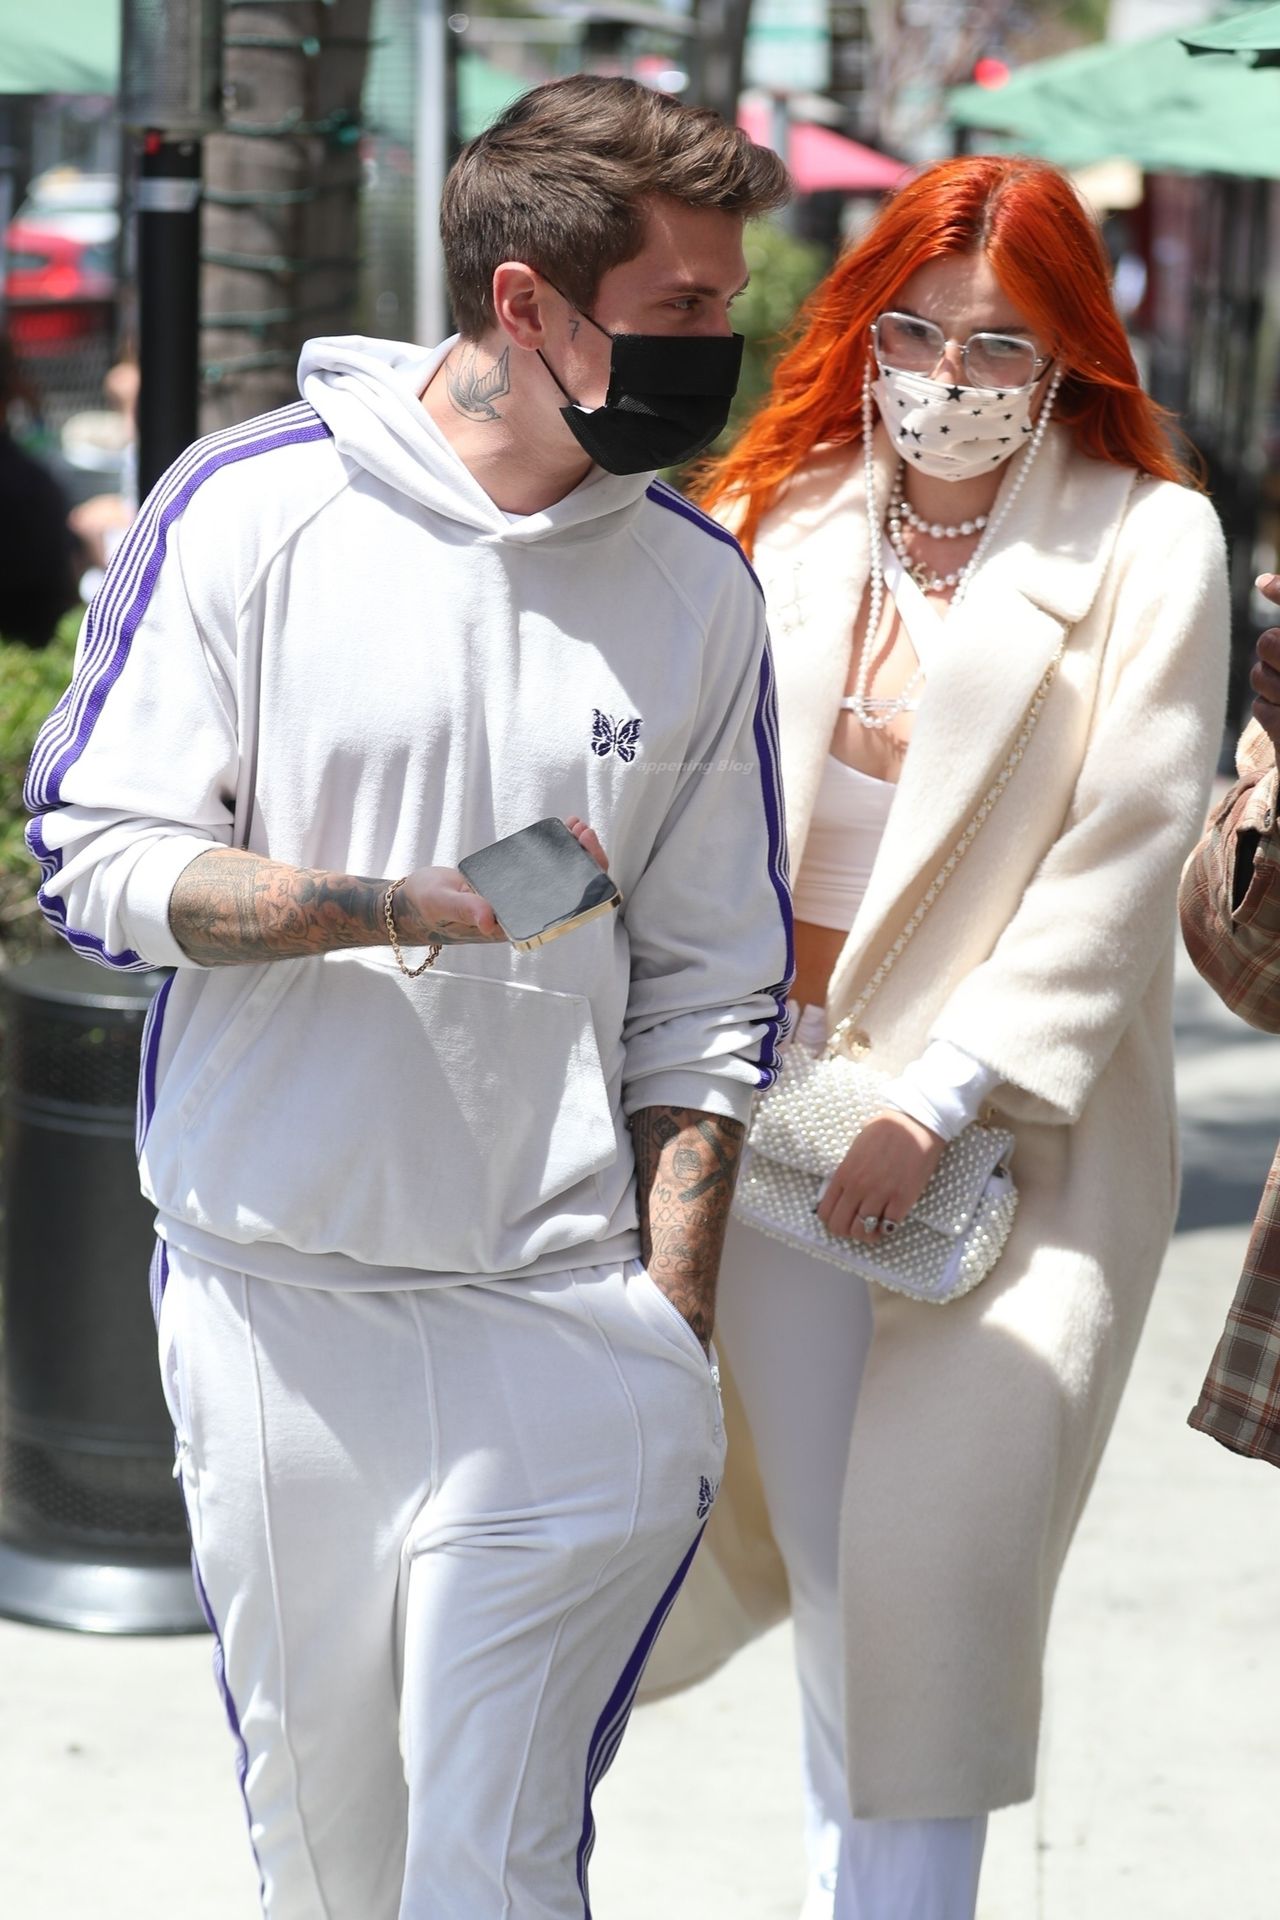 Bella Thorne & Benjamin Mascolo Match in All White For a Date at Il Pastaio (36 Photos)